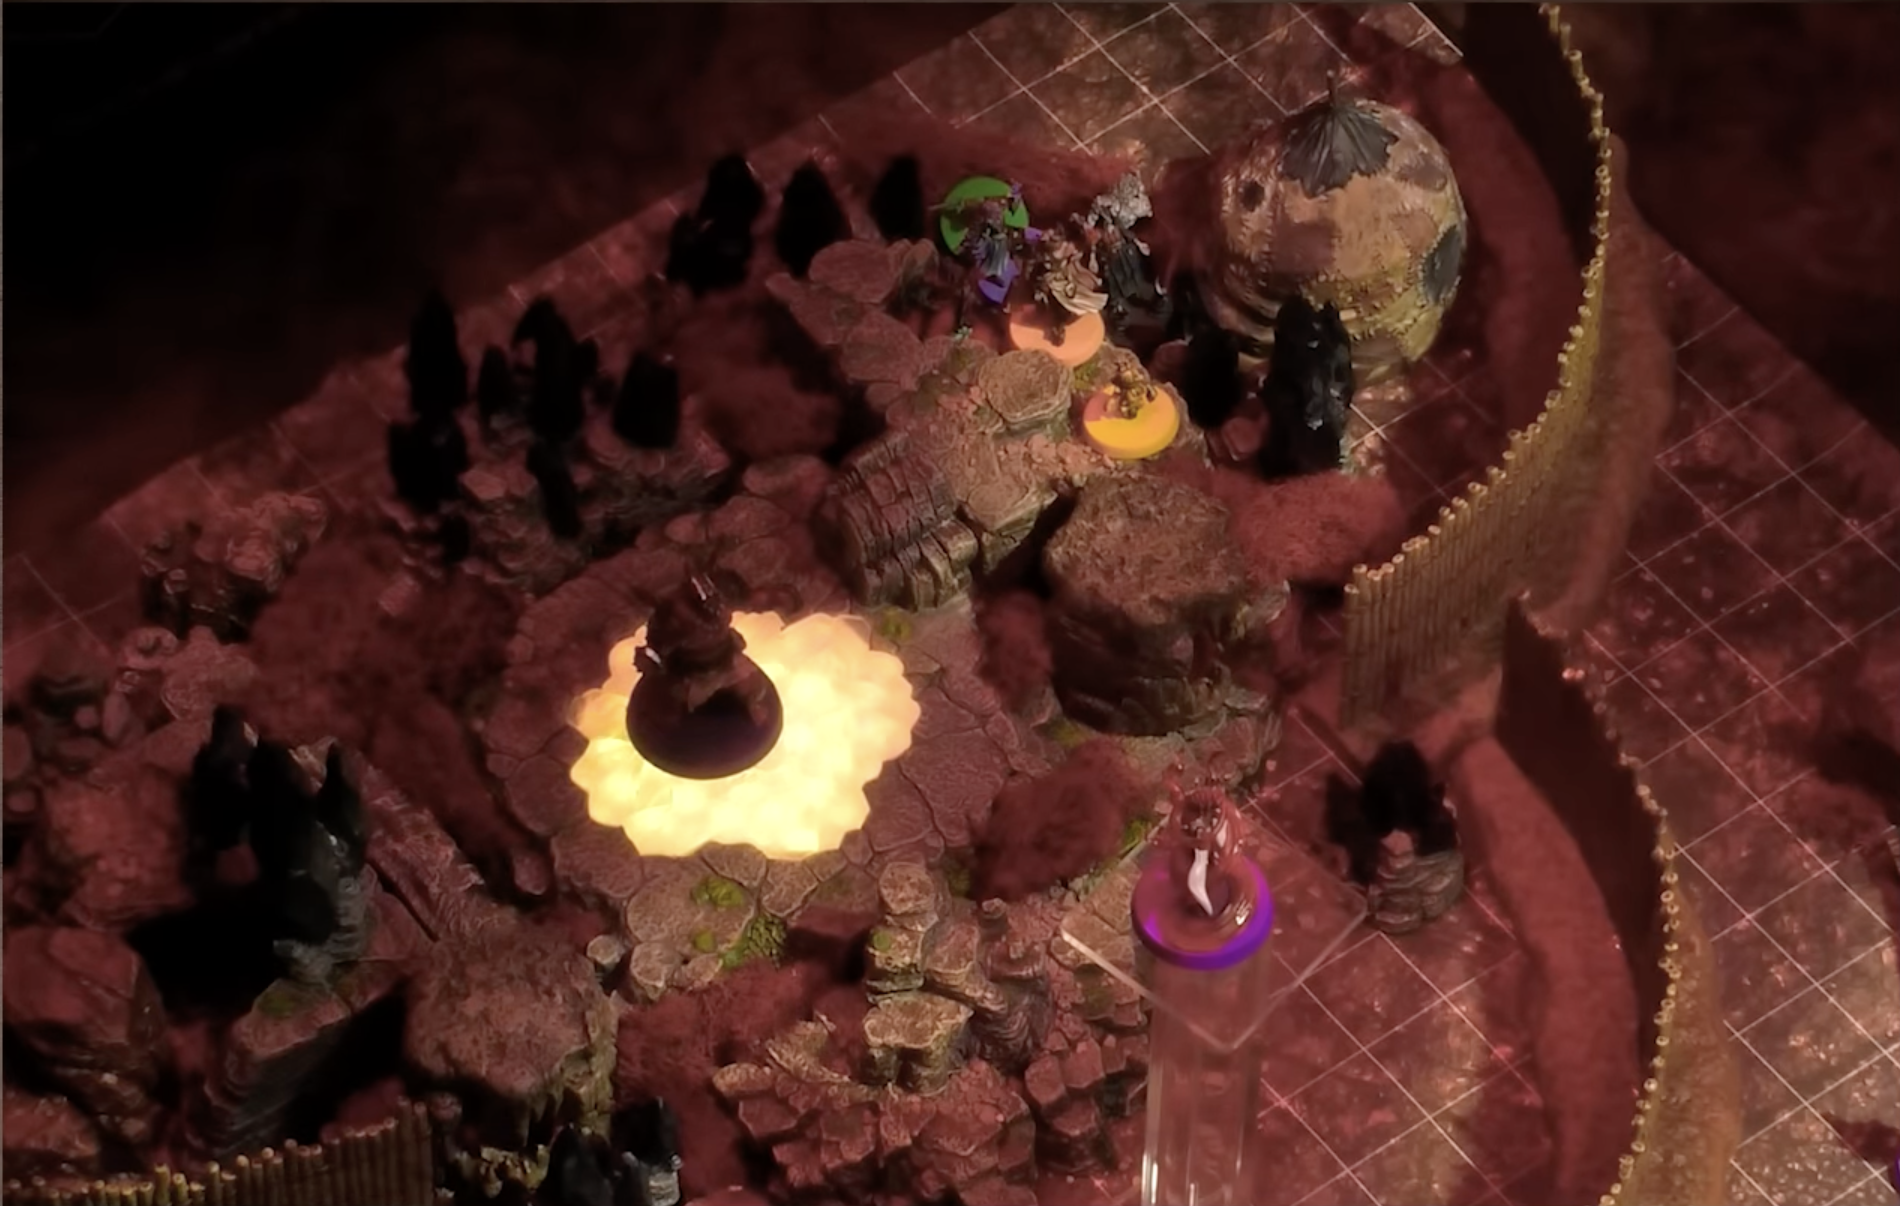 A battlemap of a fenced encampment built around a glowing portal on the ground. A large Reiloran stands on the portal while another flies above in the foreground. The party stands by a patchwork hut separated from the large Reiloran by some stone formations.